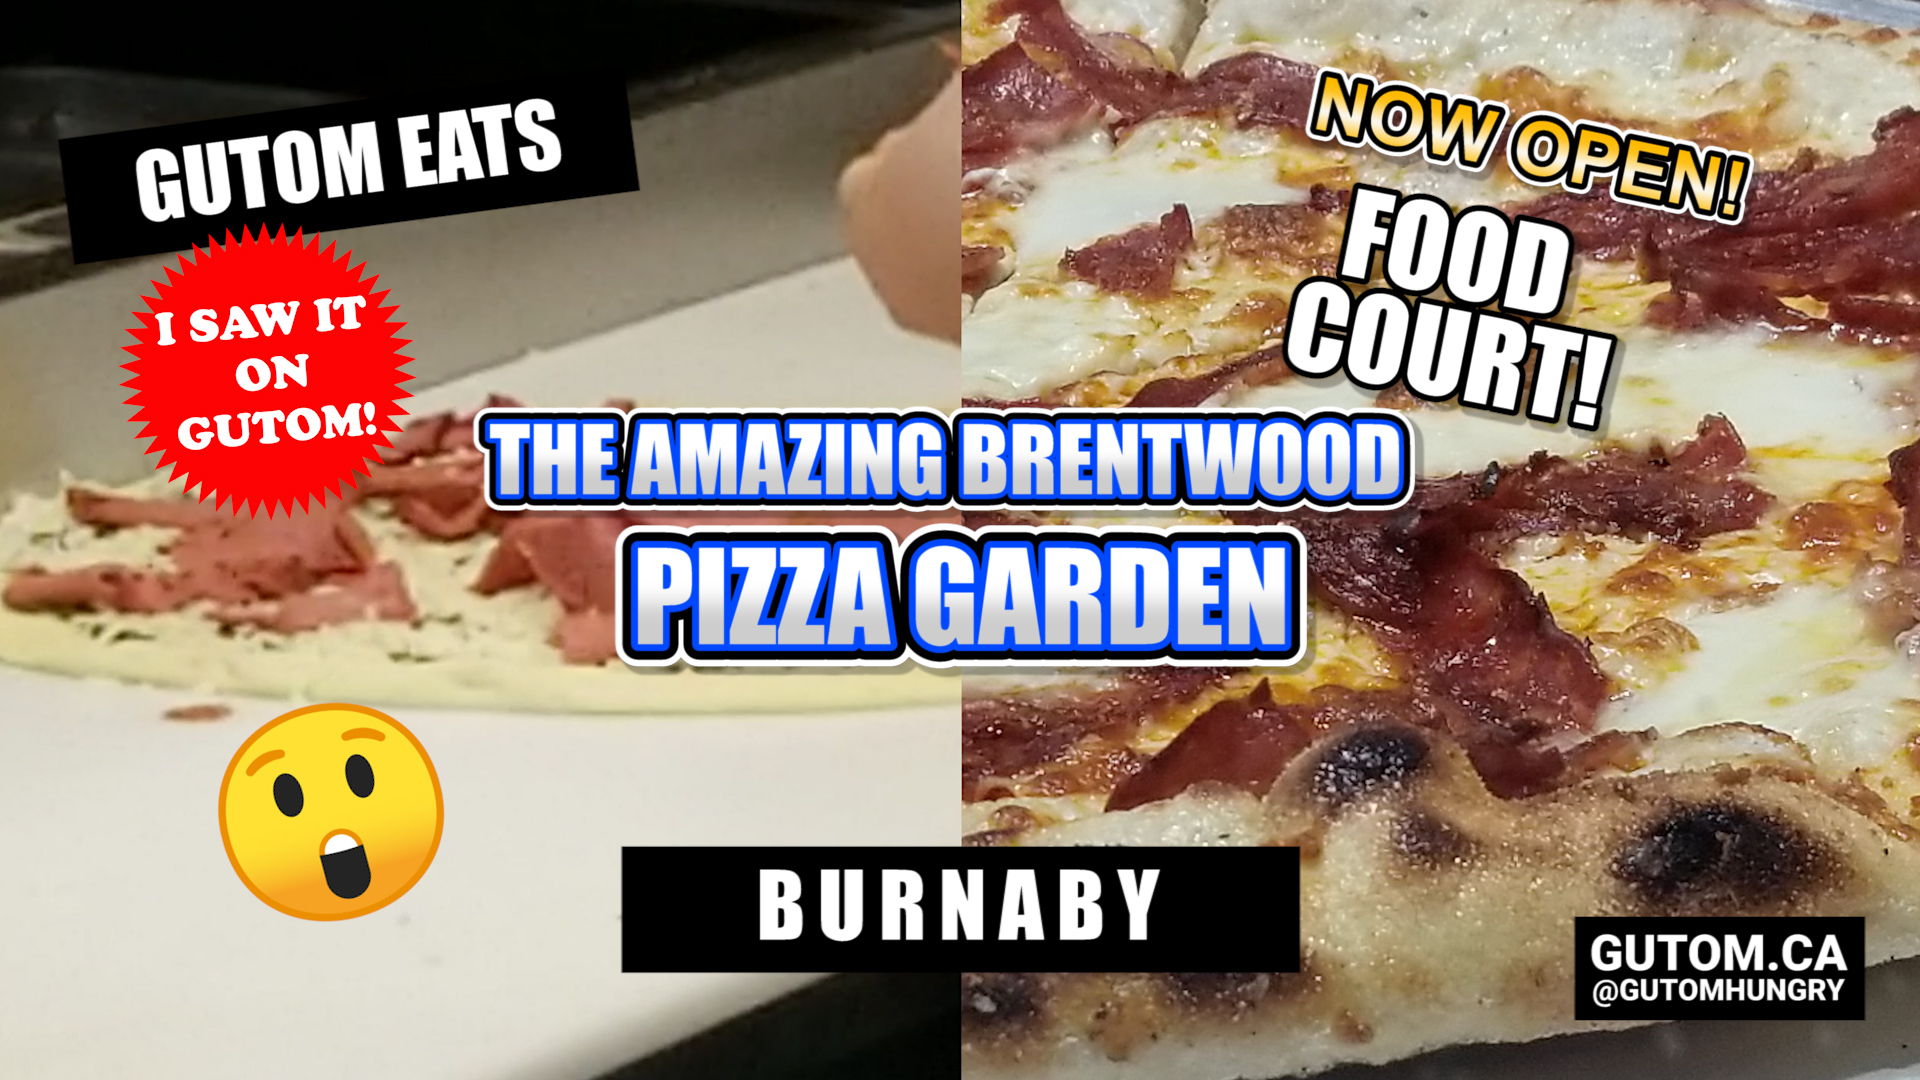 Now Open Pizza Garden At The Amazing Brentwood Town Centre Burnaby Lougheed Willingdon Tables Food Court Vancouver Food And Travel Guide Gutom Ca Gutom